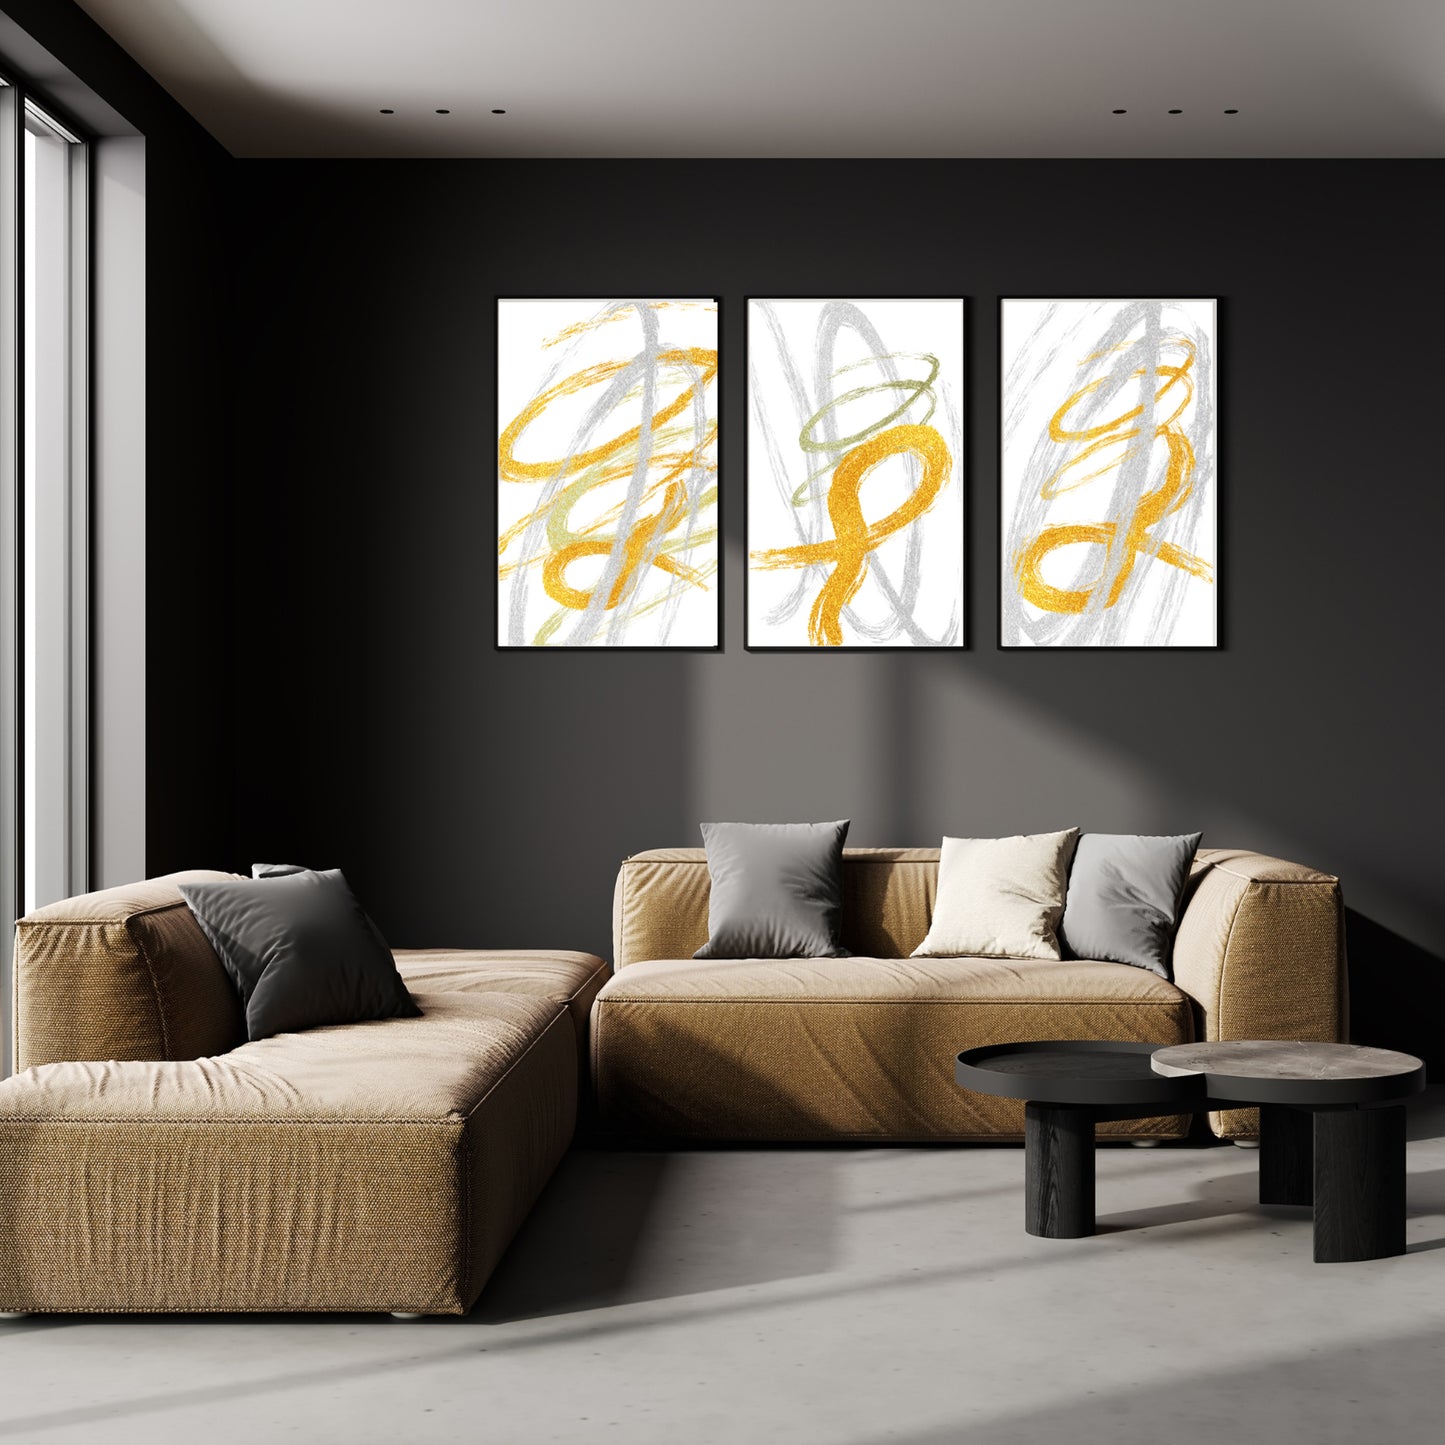 3 Set Abstract Grey White Gold For Print Digital Download Canvas Poster Wall Decor